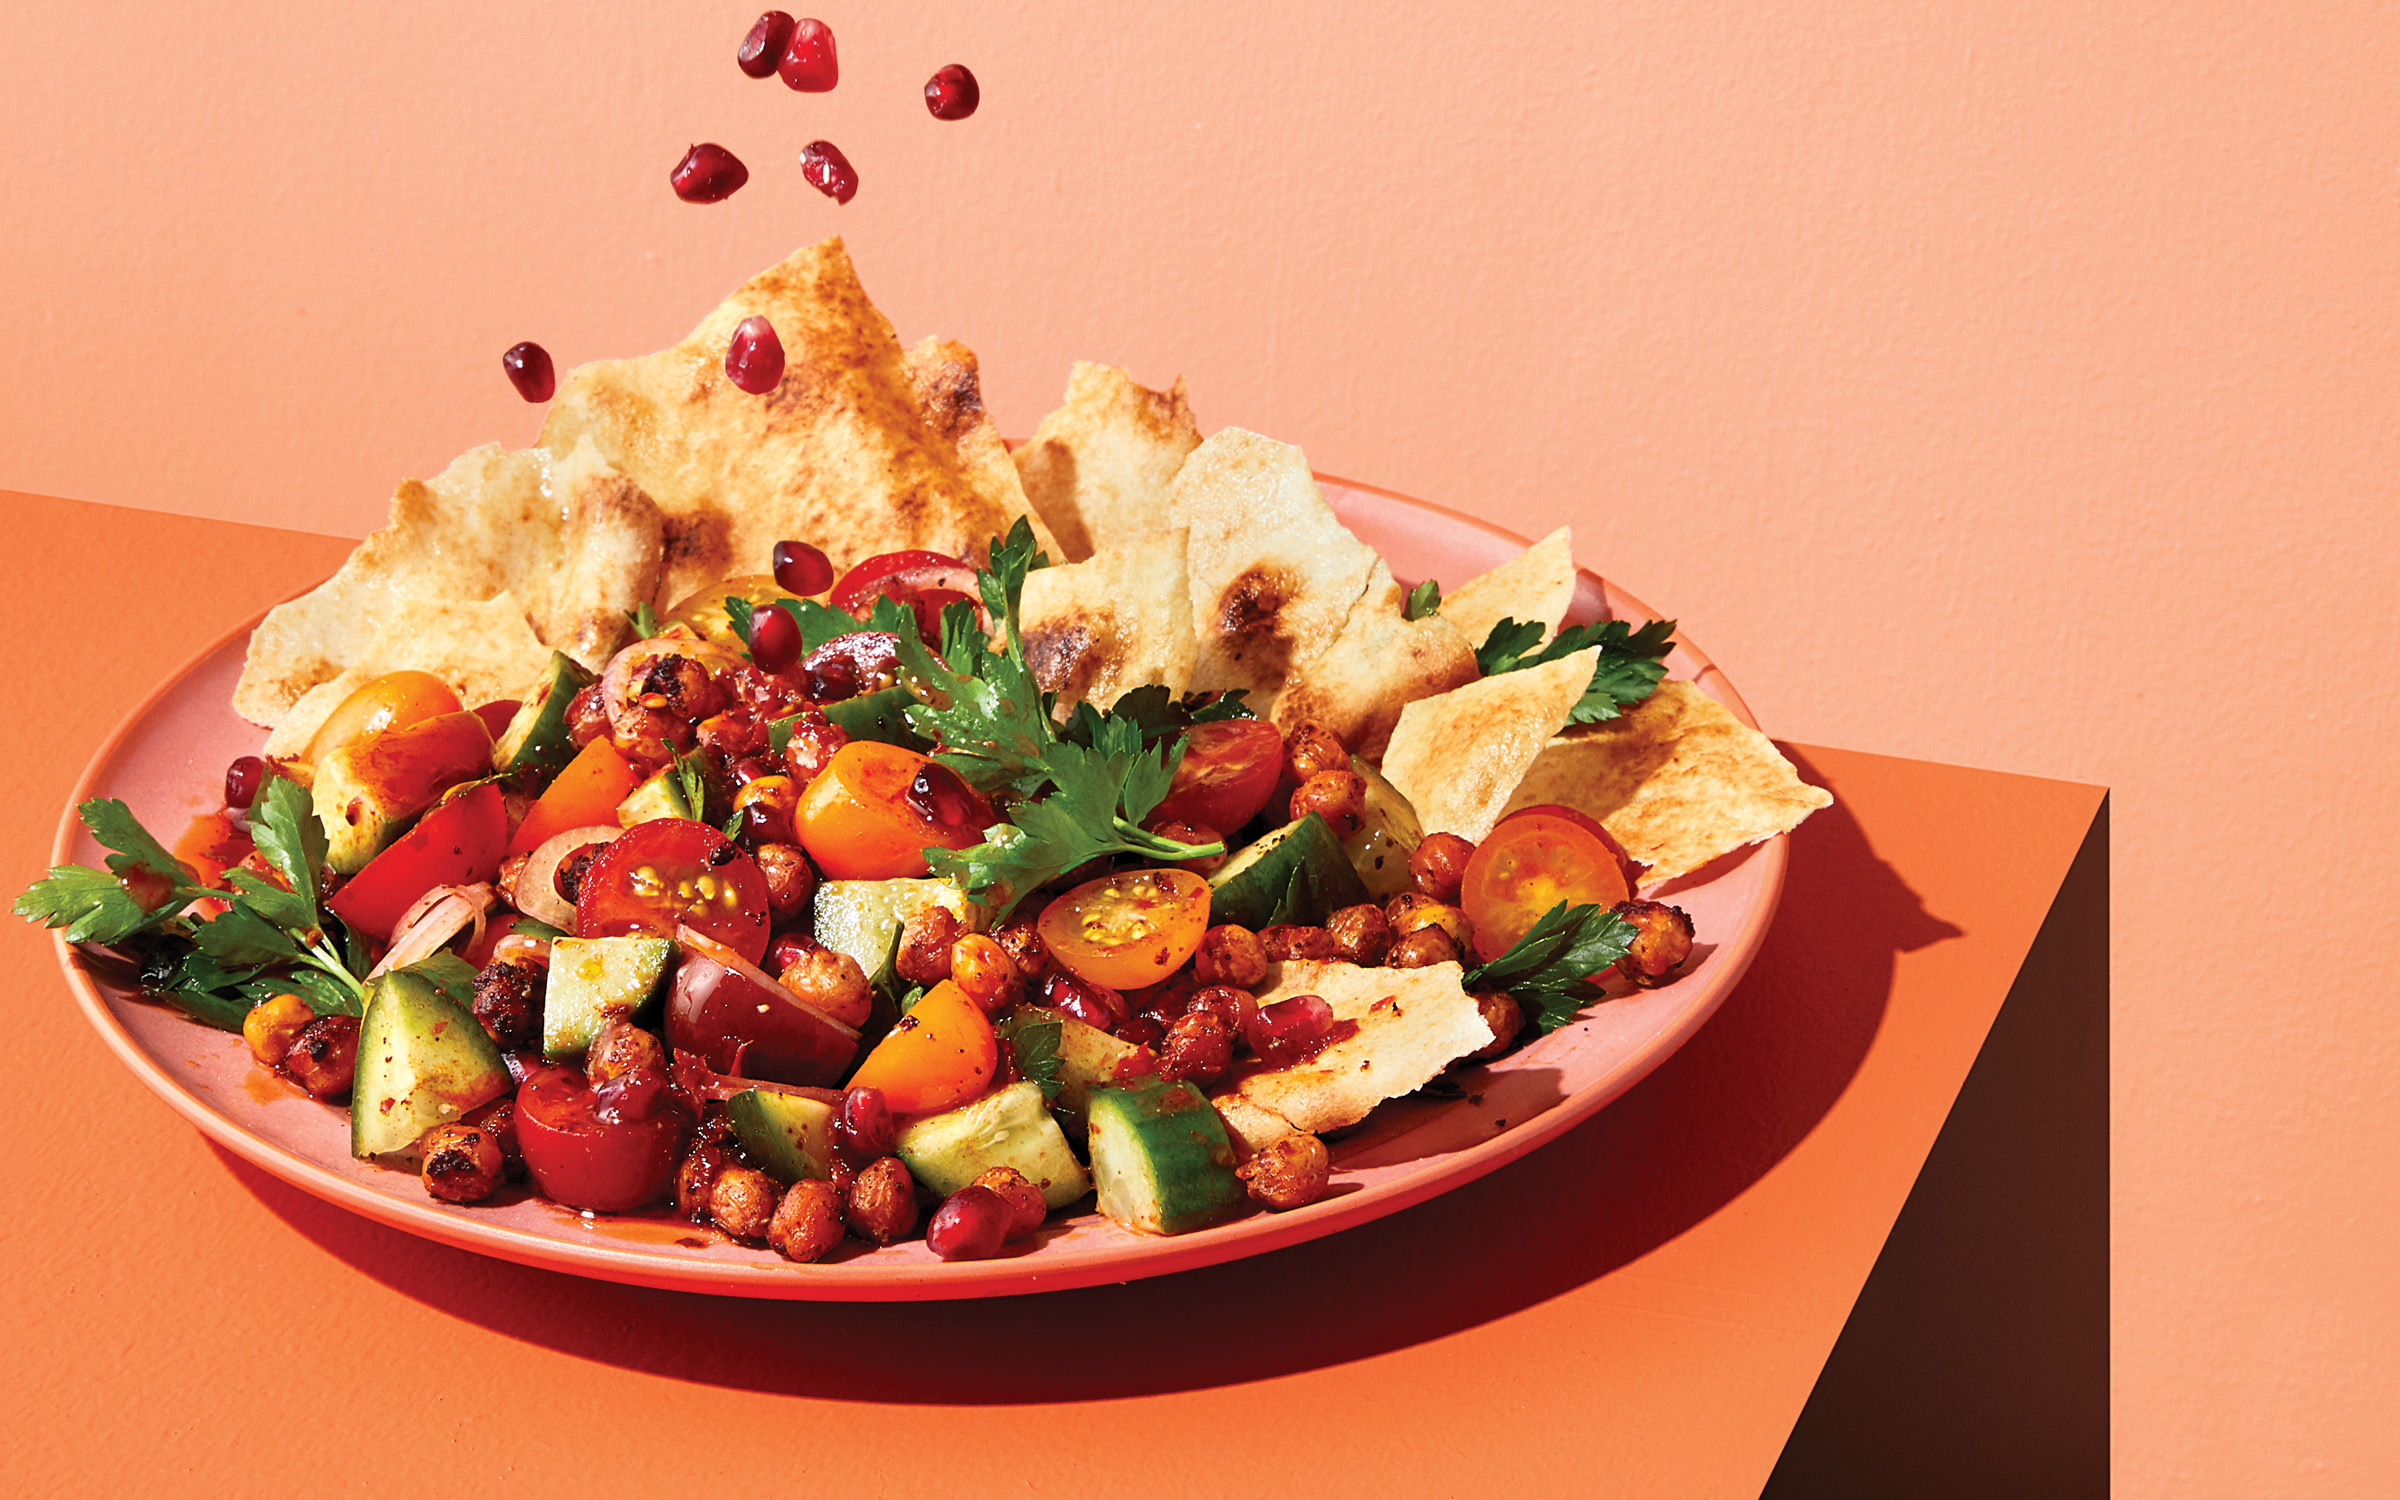 A salad with cucumbers, tomatoes, pita chips and chickpeas on a orange table against an orange background.